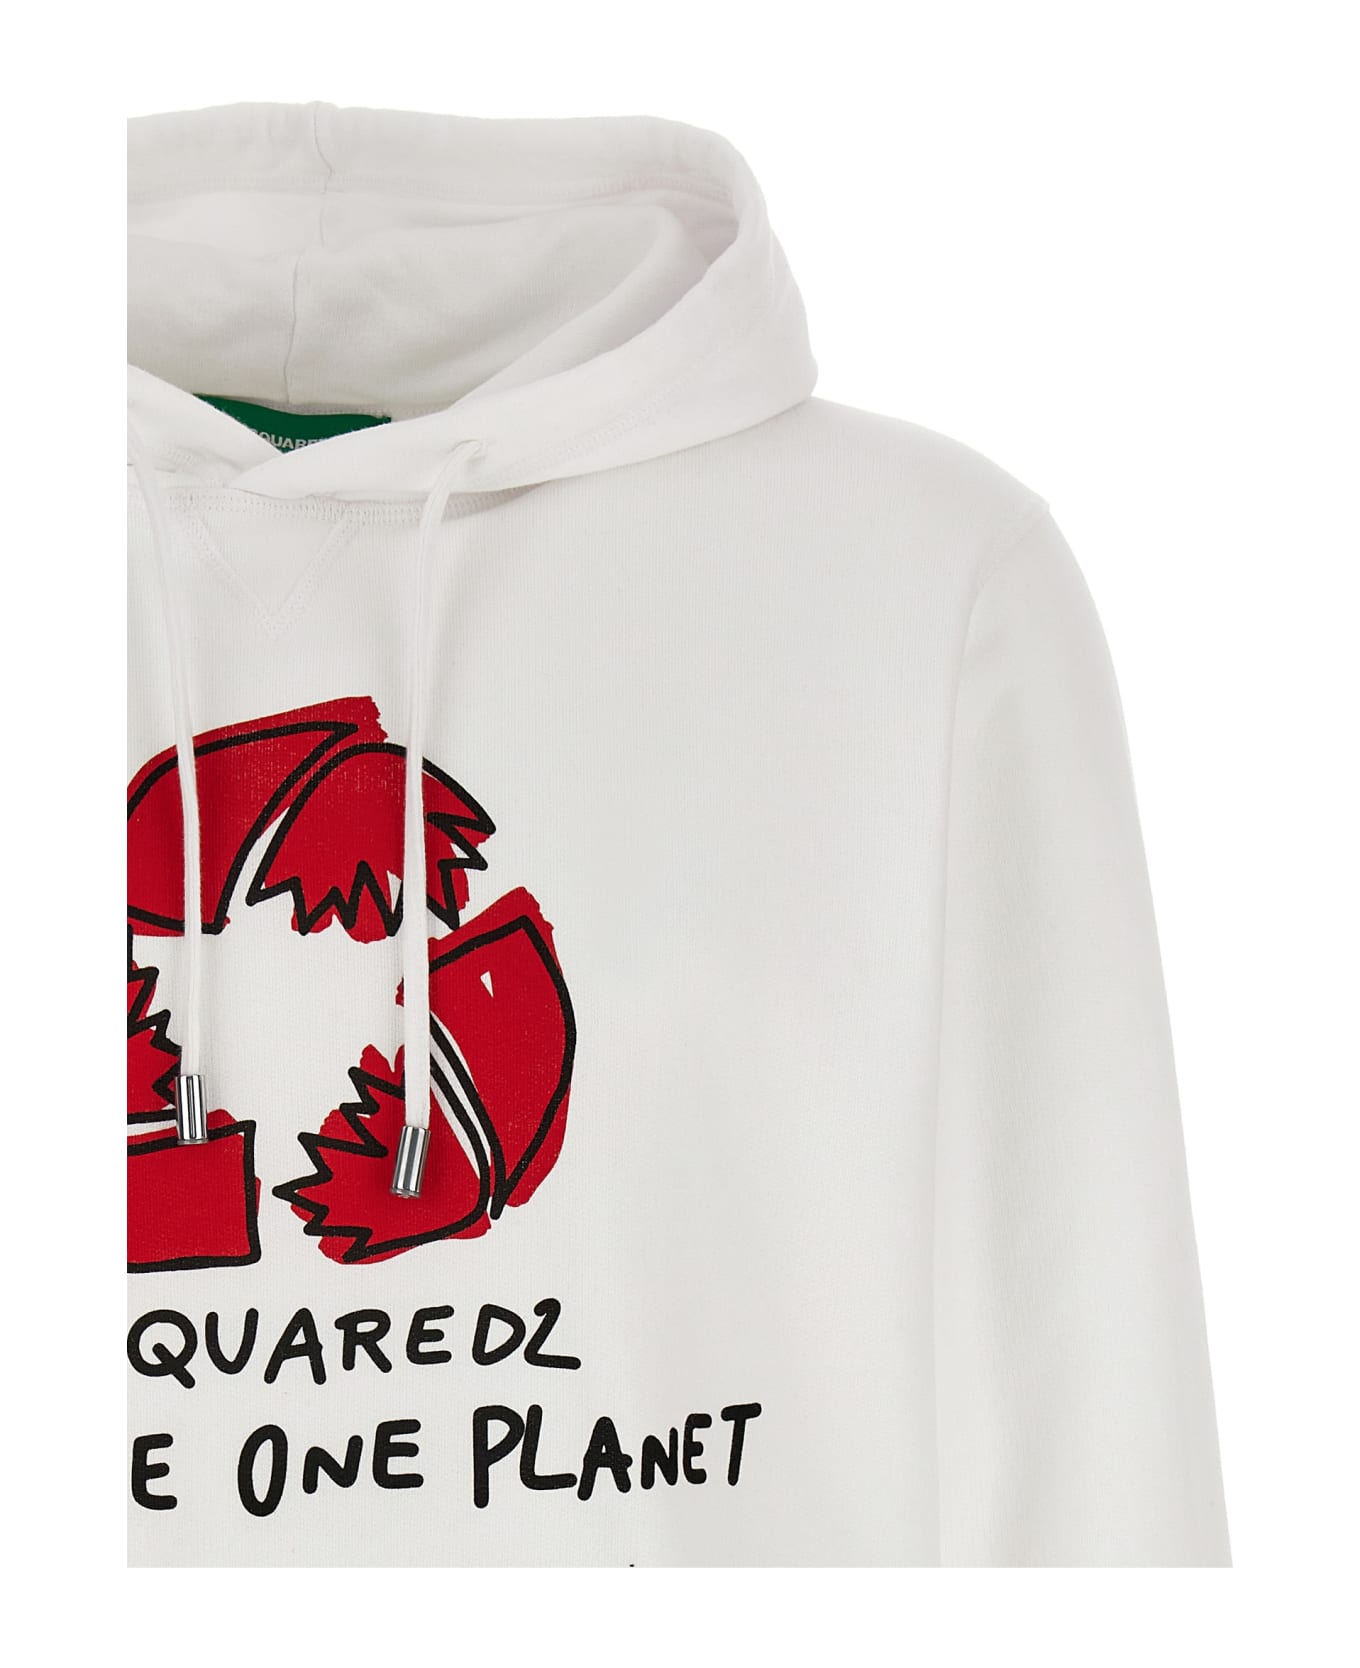 Dsquared2 One Life One Planet 'recycled Leaf' Hoodie - White